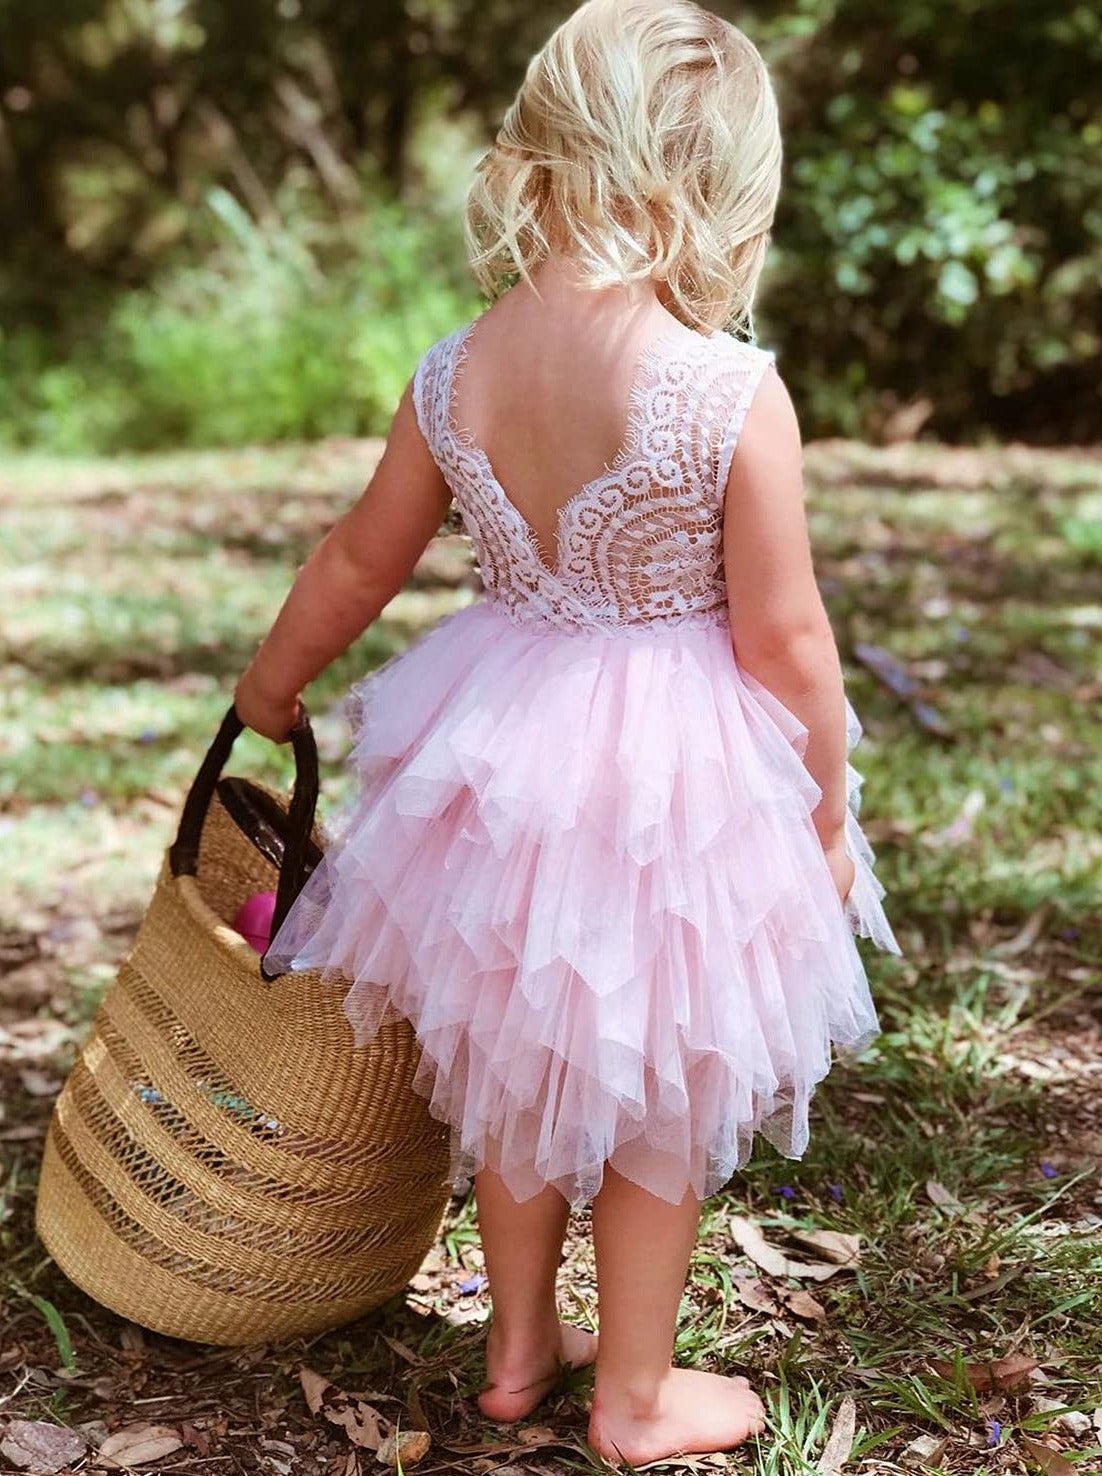 2Bunnies Flower Girl Dress Peony Lace Back A-Line Sleeveless Tiered Tulle Short (No Applique All Pink) - 2BUNNIES